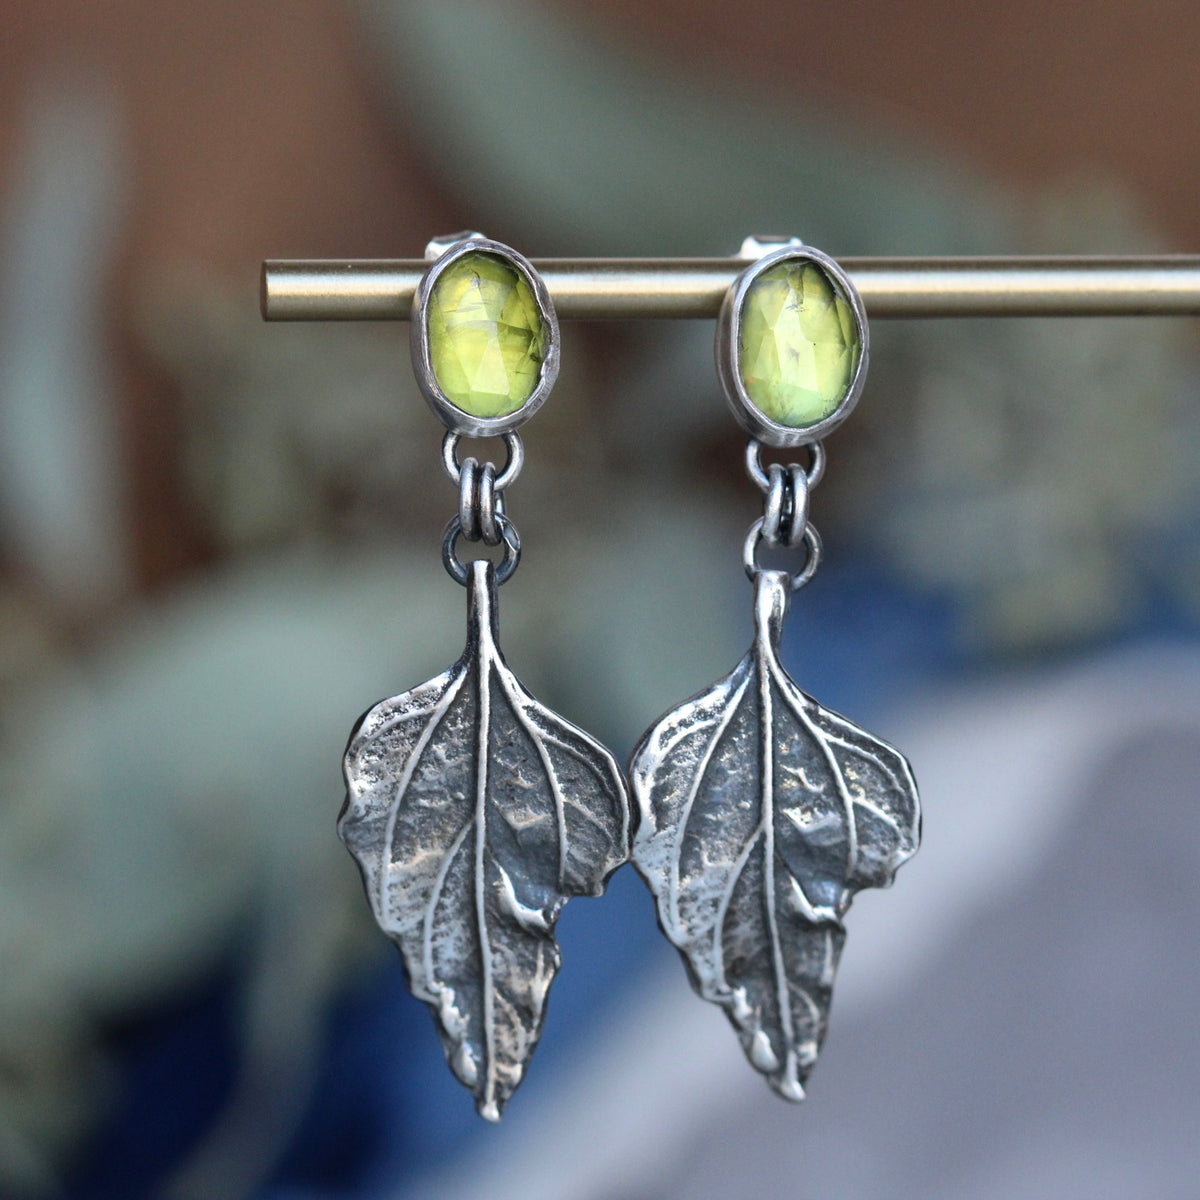 Brittlebush leaves and Peridot sterling silver Statement Earrings